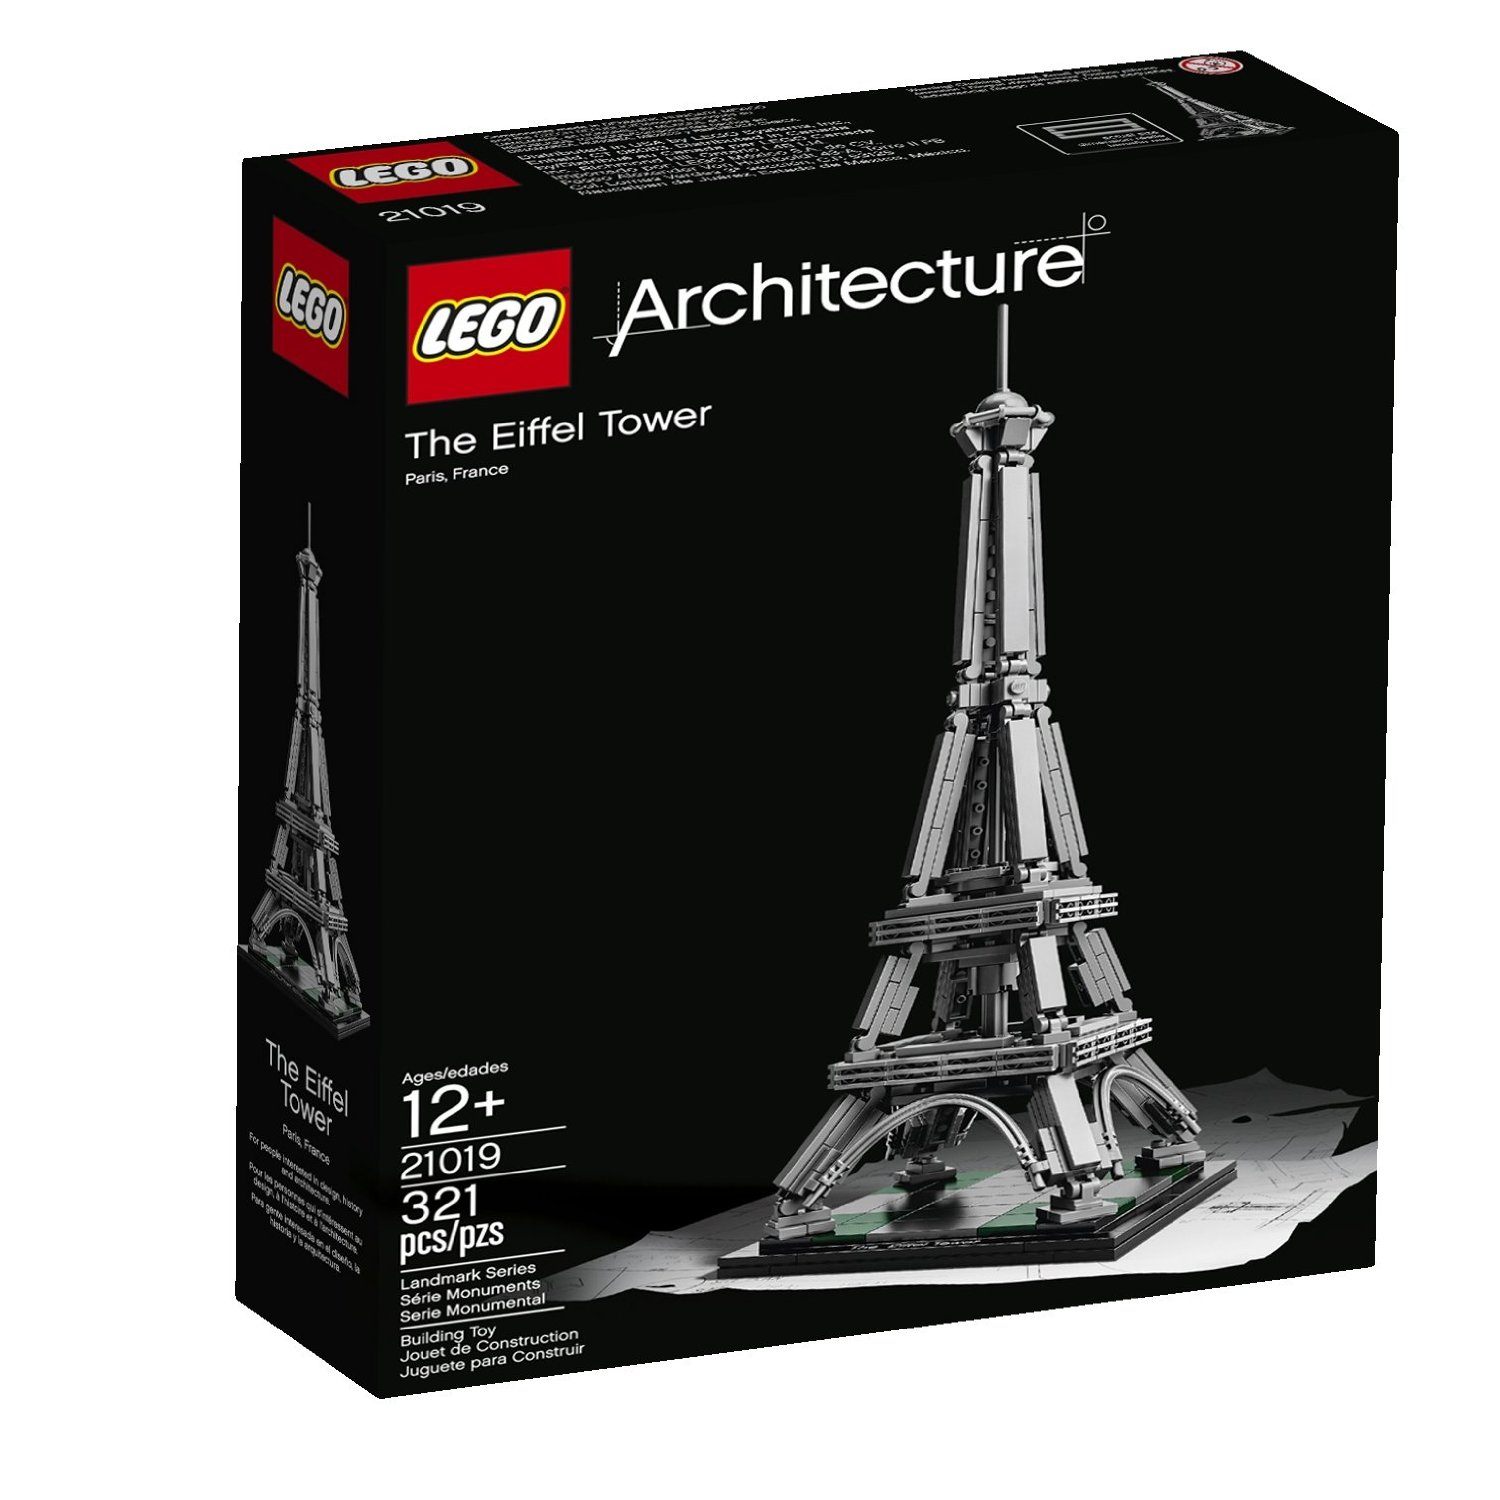 LEGO Architecture 21019 The Eiffel Tower Just $28.99!